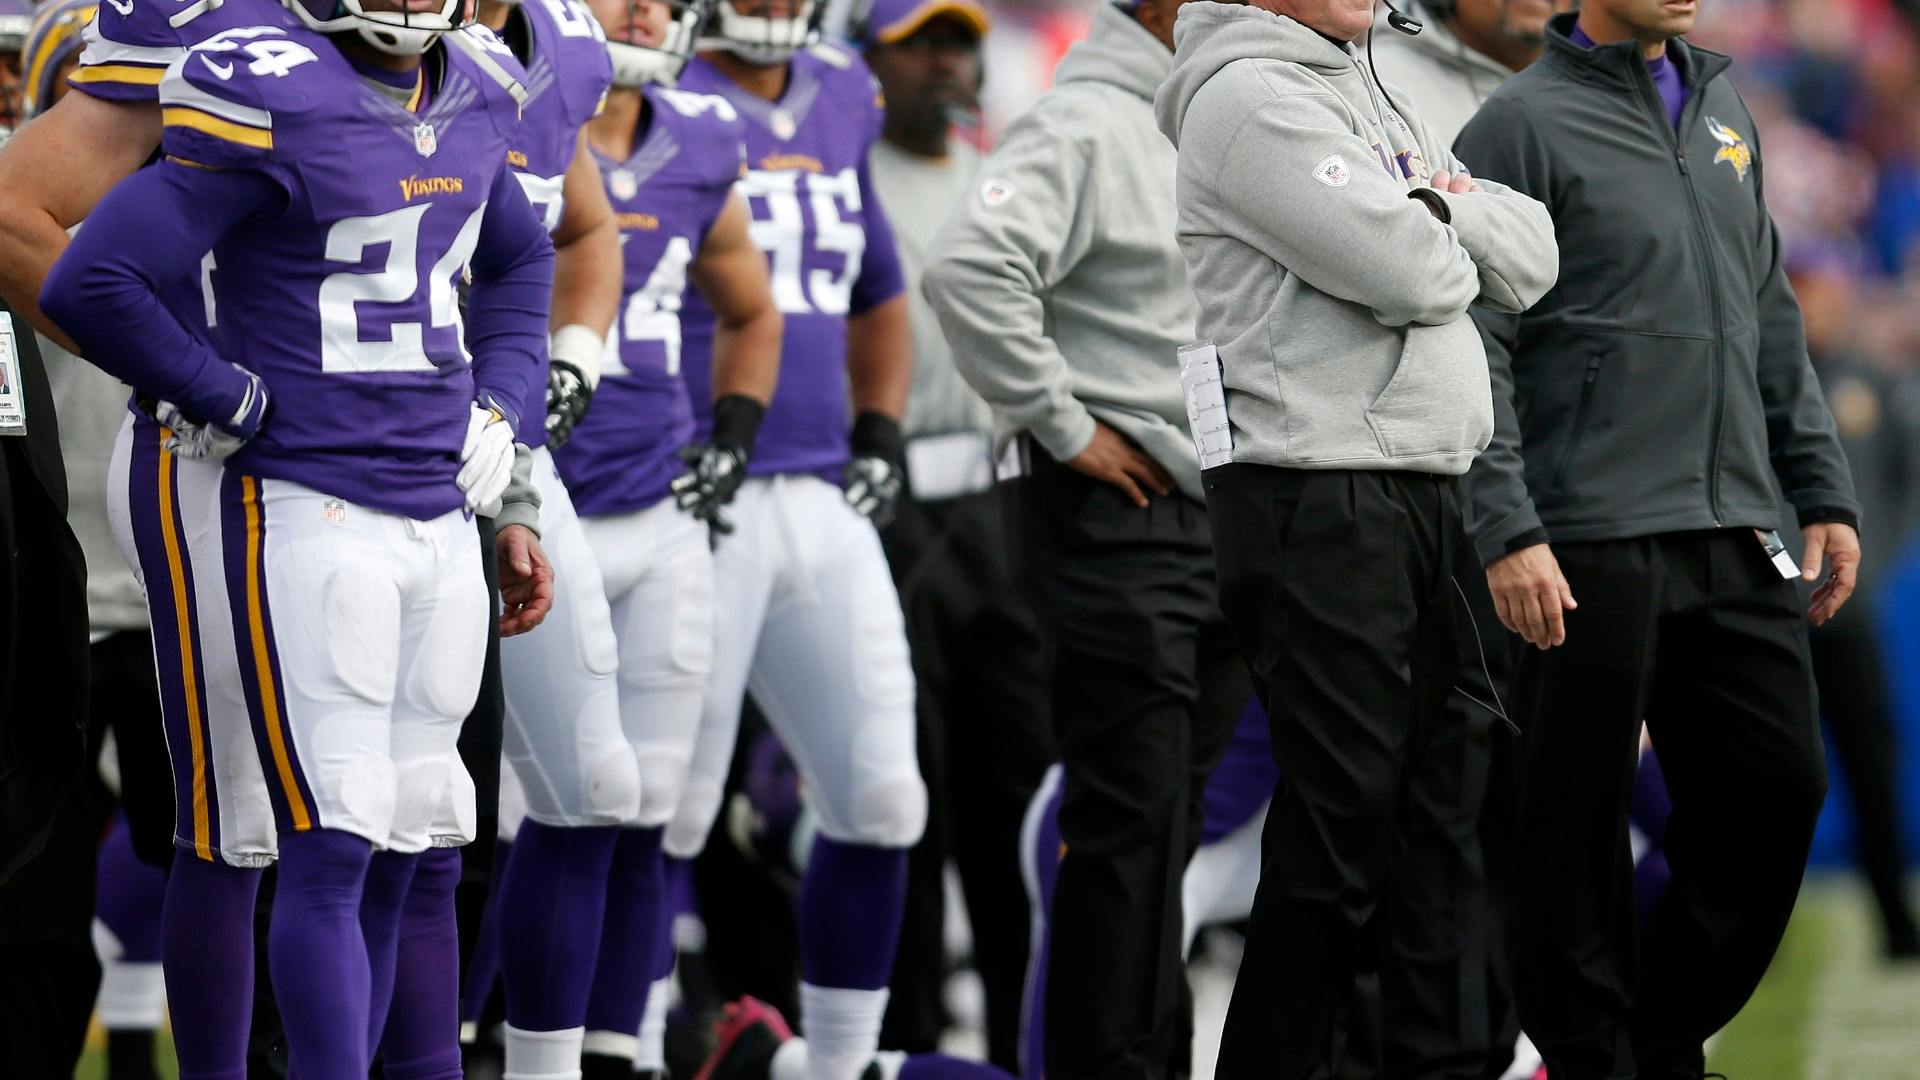 Columnist Jim Souhan felt there were some positives from the Vikings 17-16 loss to the Bills, including the development of head coach Mike Zimmer's defense.